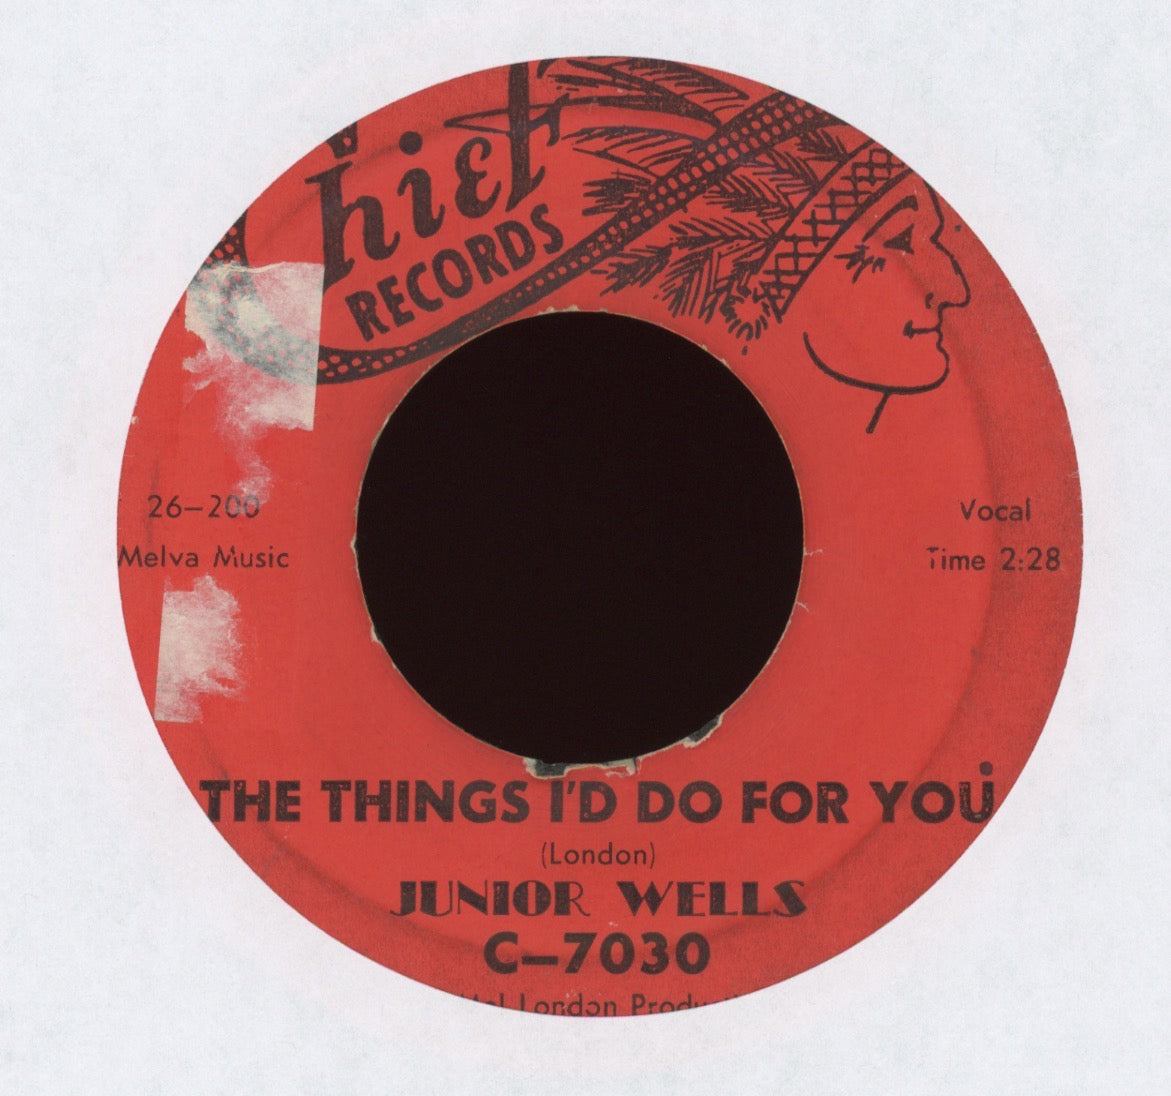 Junior Wells - The Things I'd Do For You on Chief R&B 45